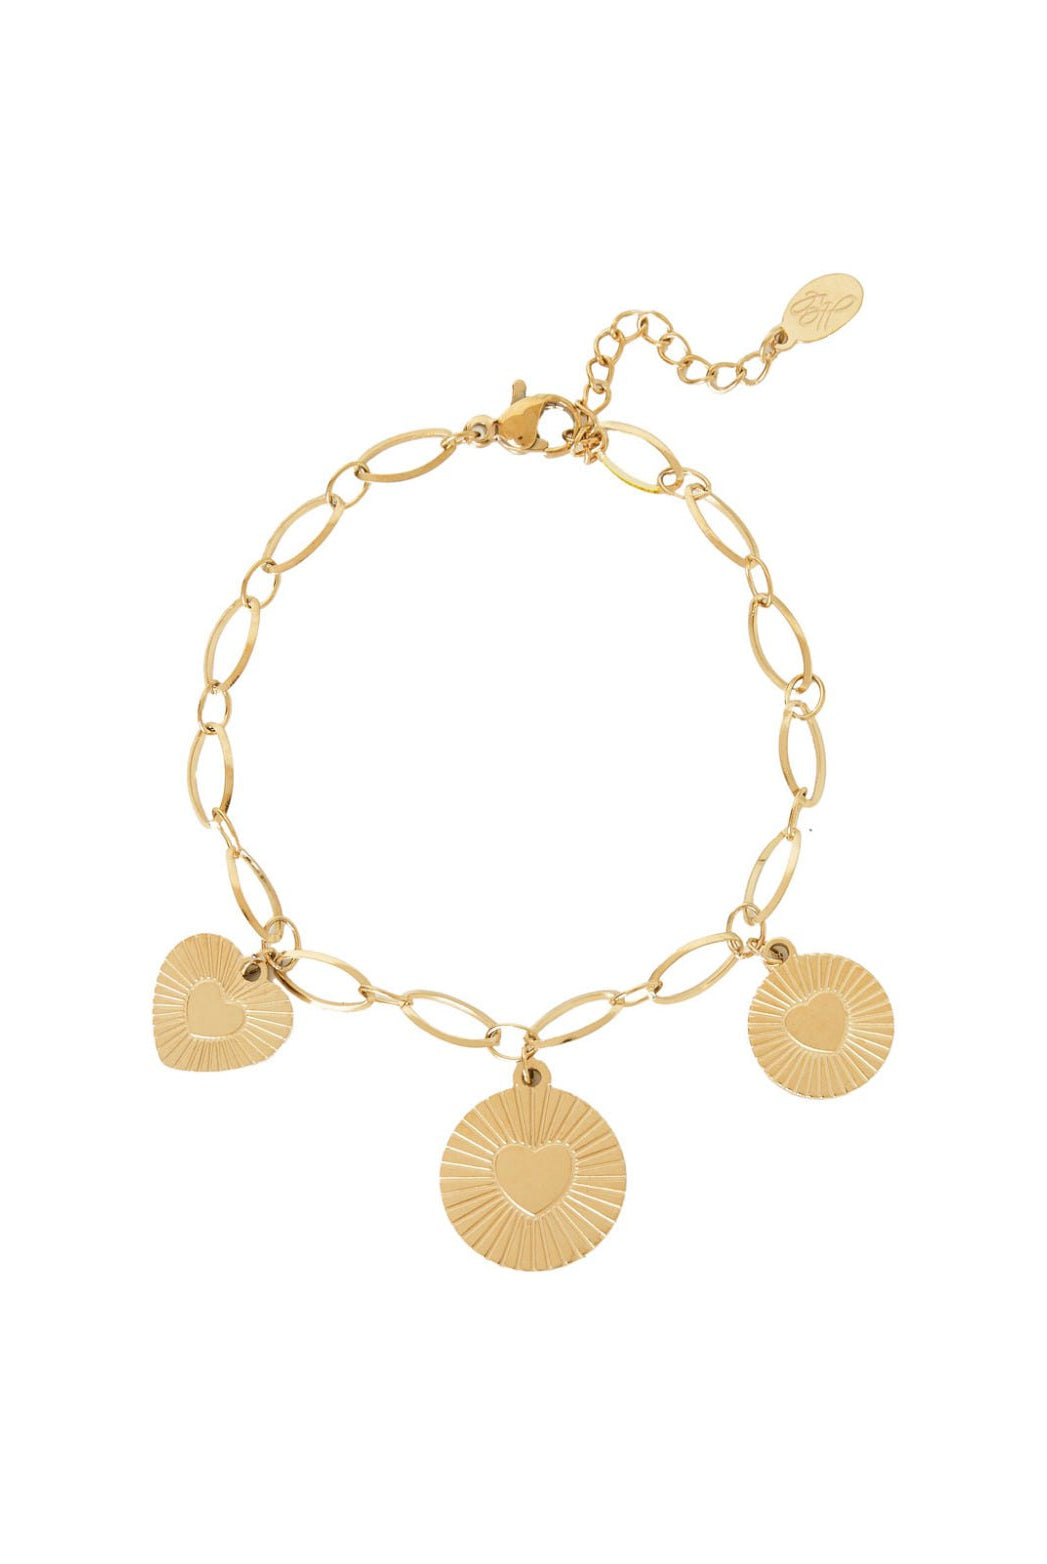 ♥︎ 3 COINS ARMBAND - My Favourites